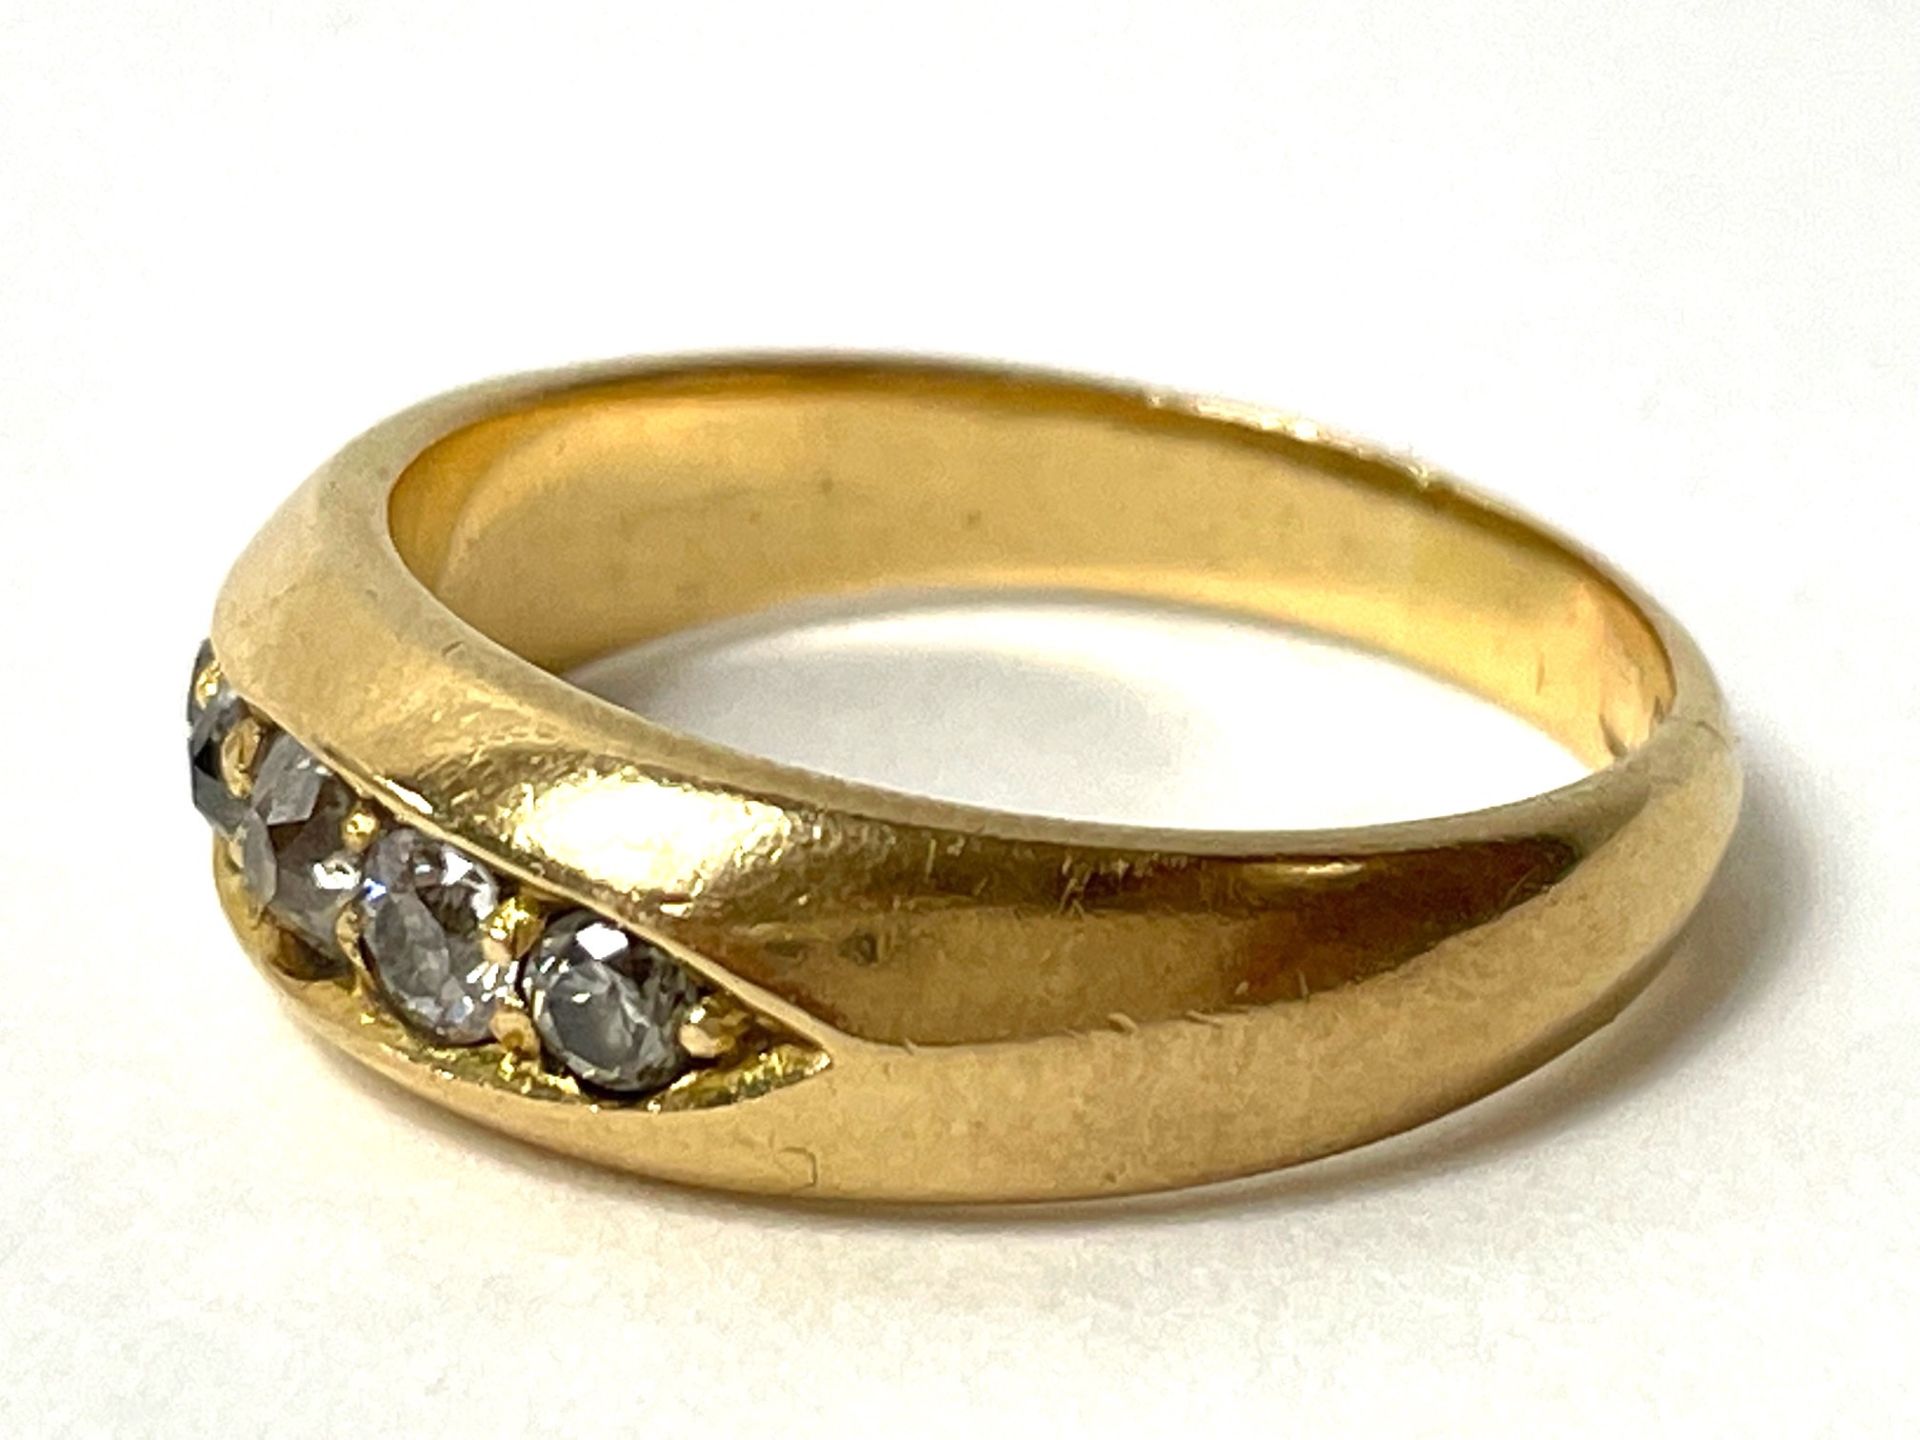 Antique ring with rose-cut diamonds - Image 3 of 6